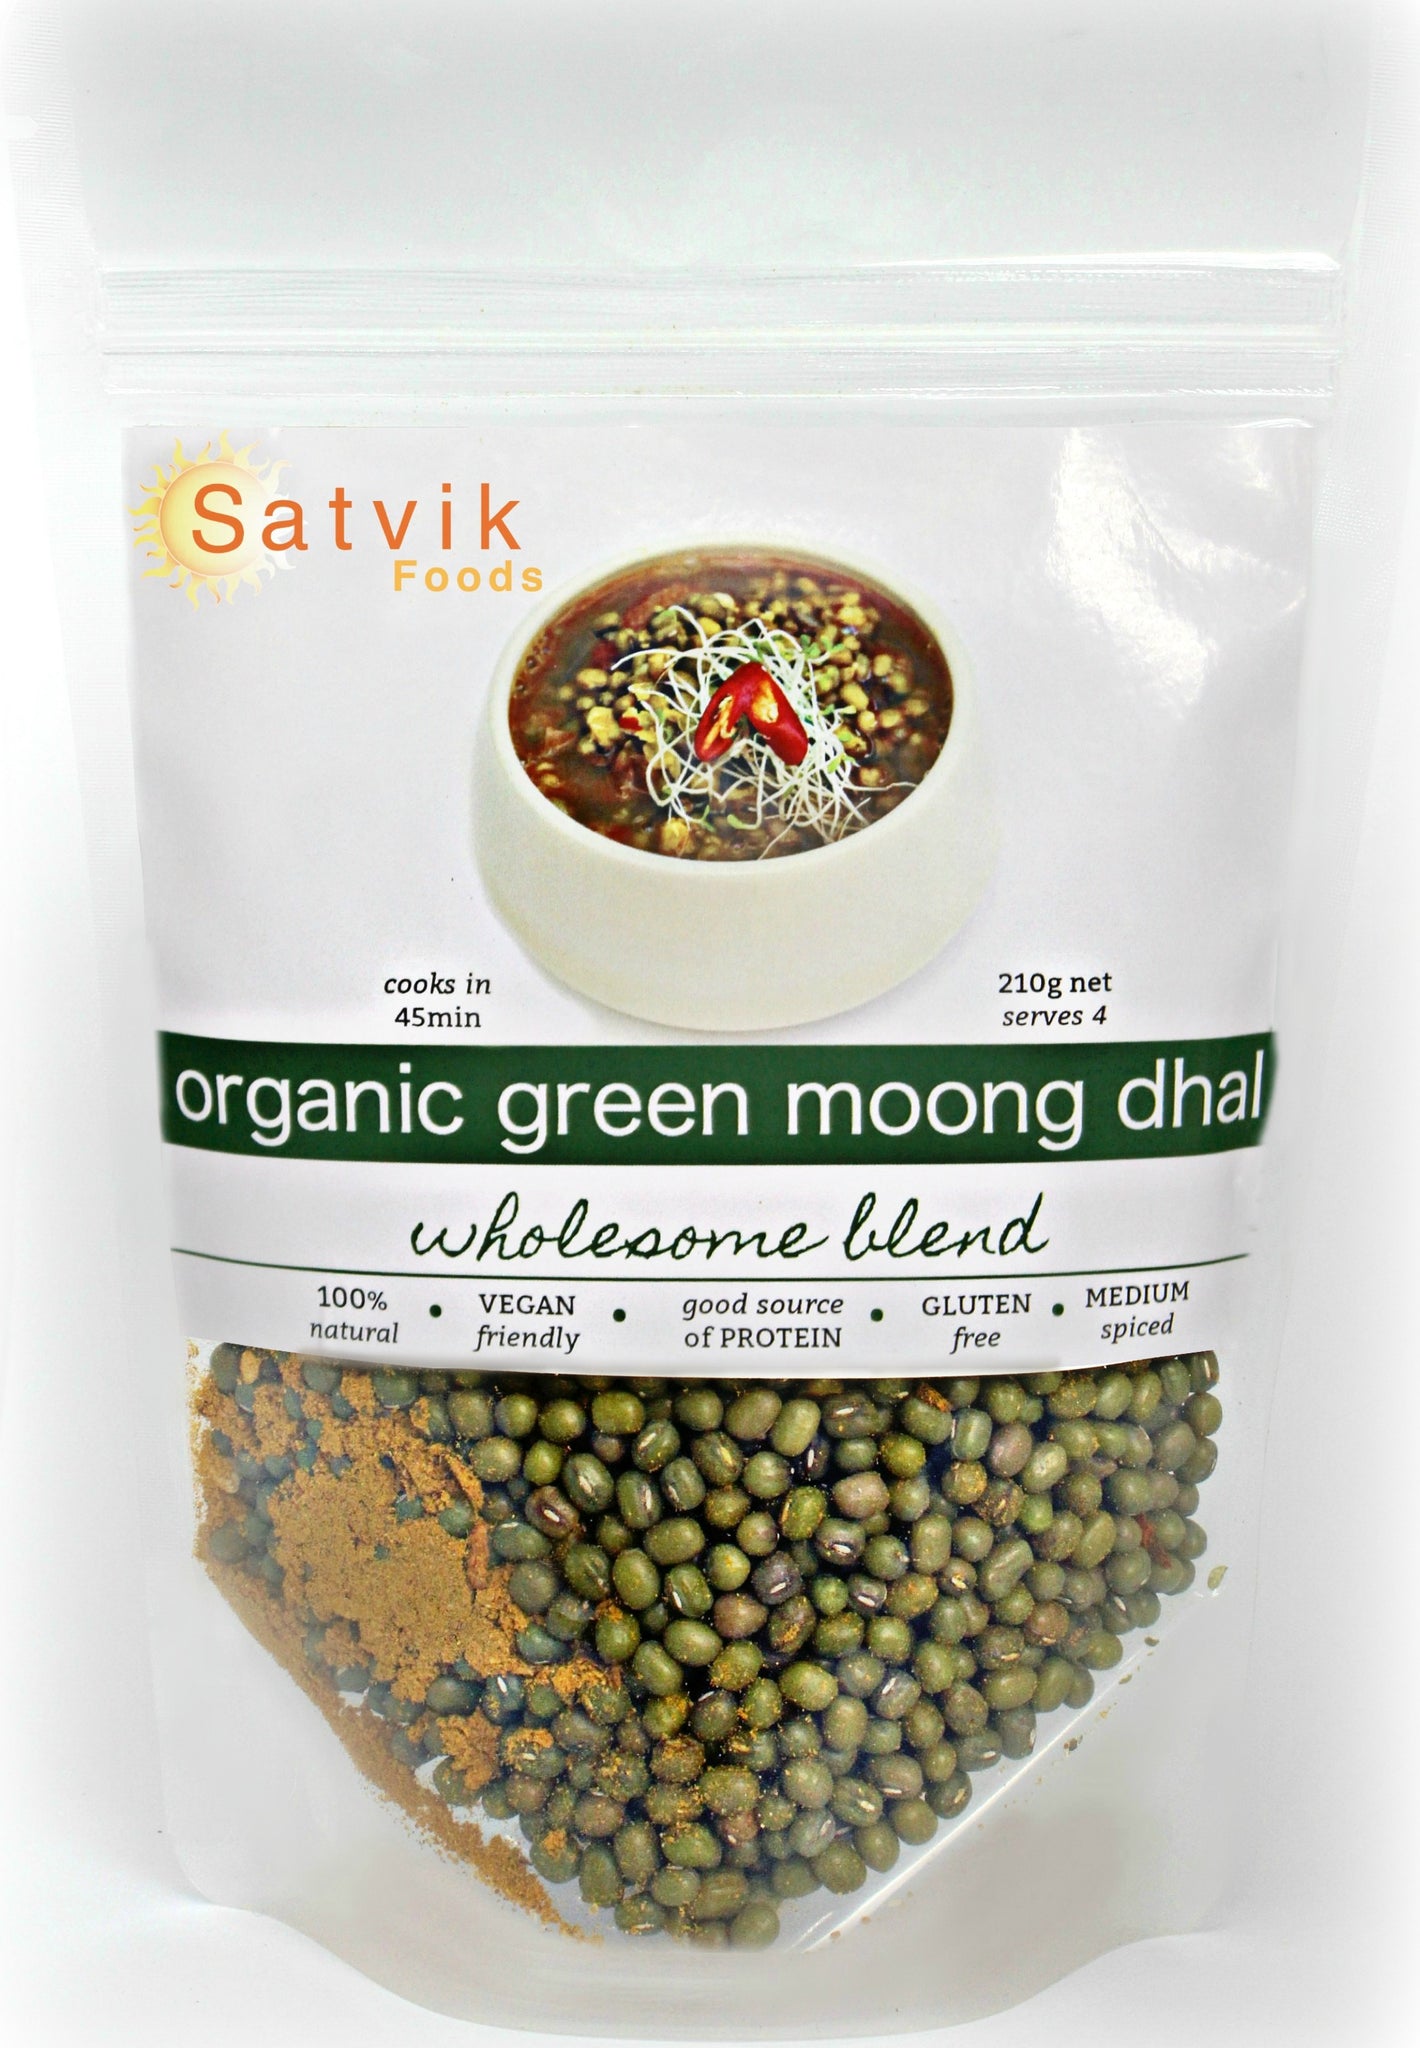 organic green moong dhal by Satvik foods is so delicious and easy to prepare. This easy meal pack features all the spices and touch of organic sea salt so all you need to do is sauté simmer and serve